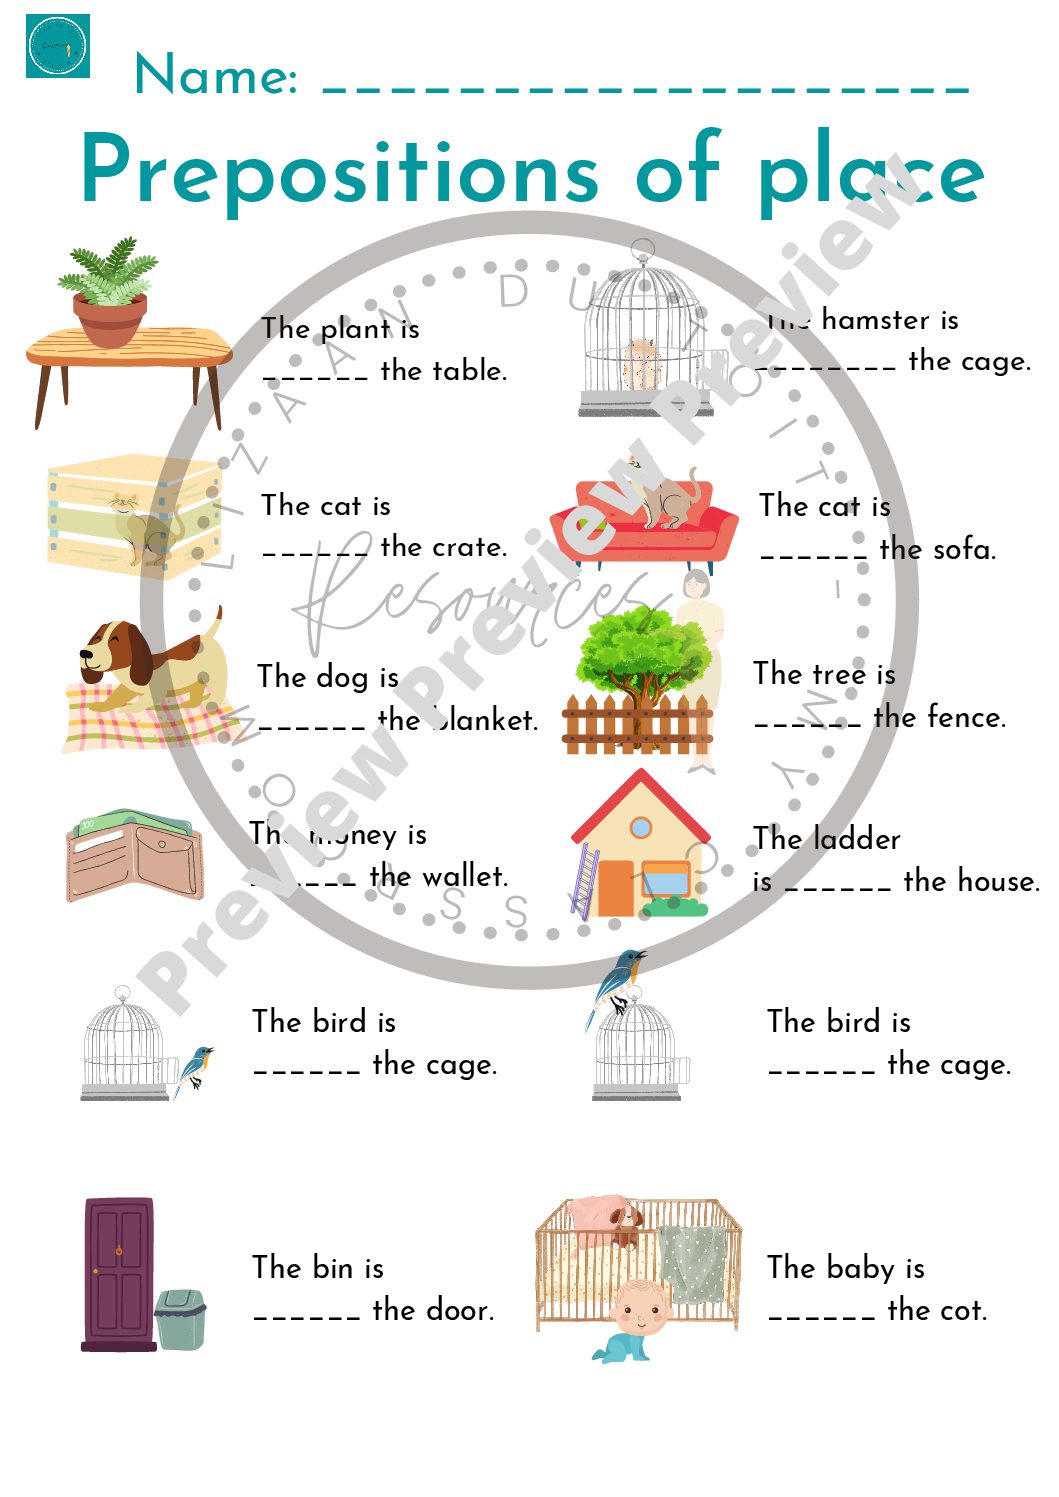 Prepositions Of Place Worksheet - Free Esl Printable Worksheets Made By A62